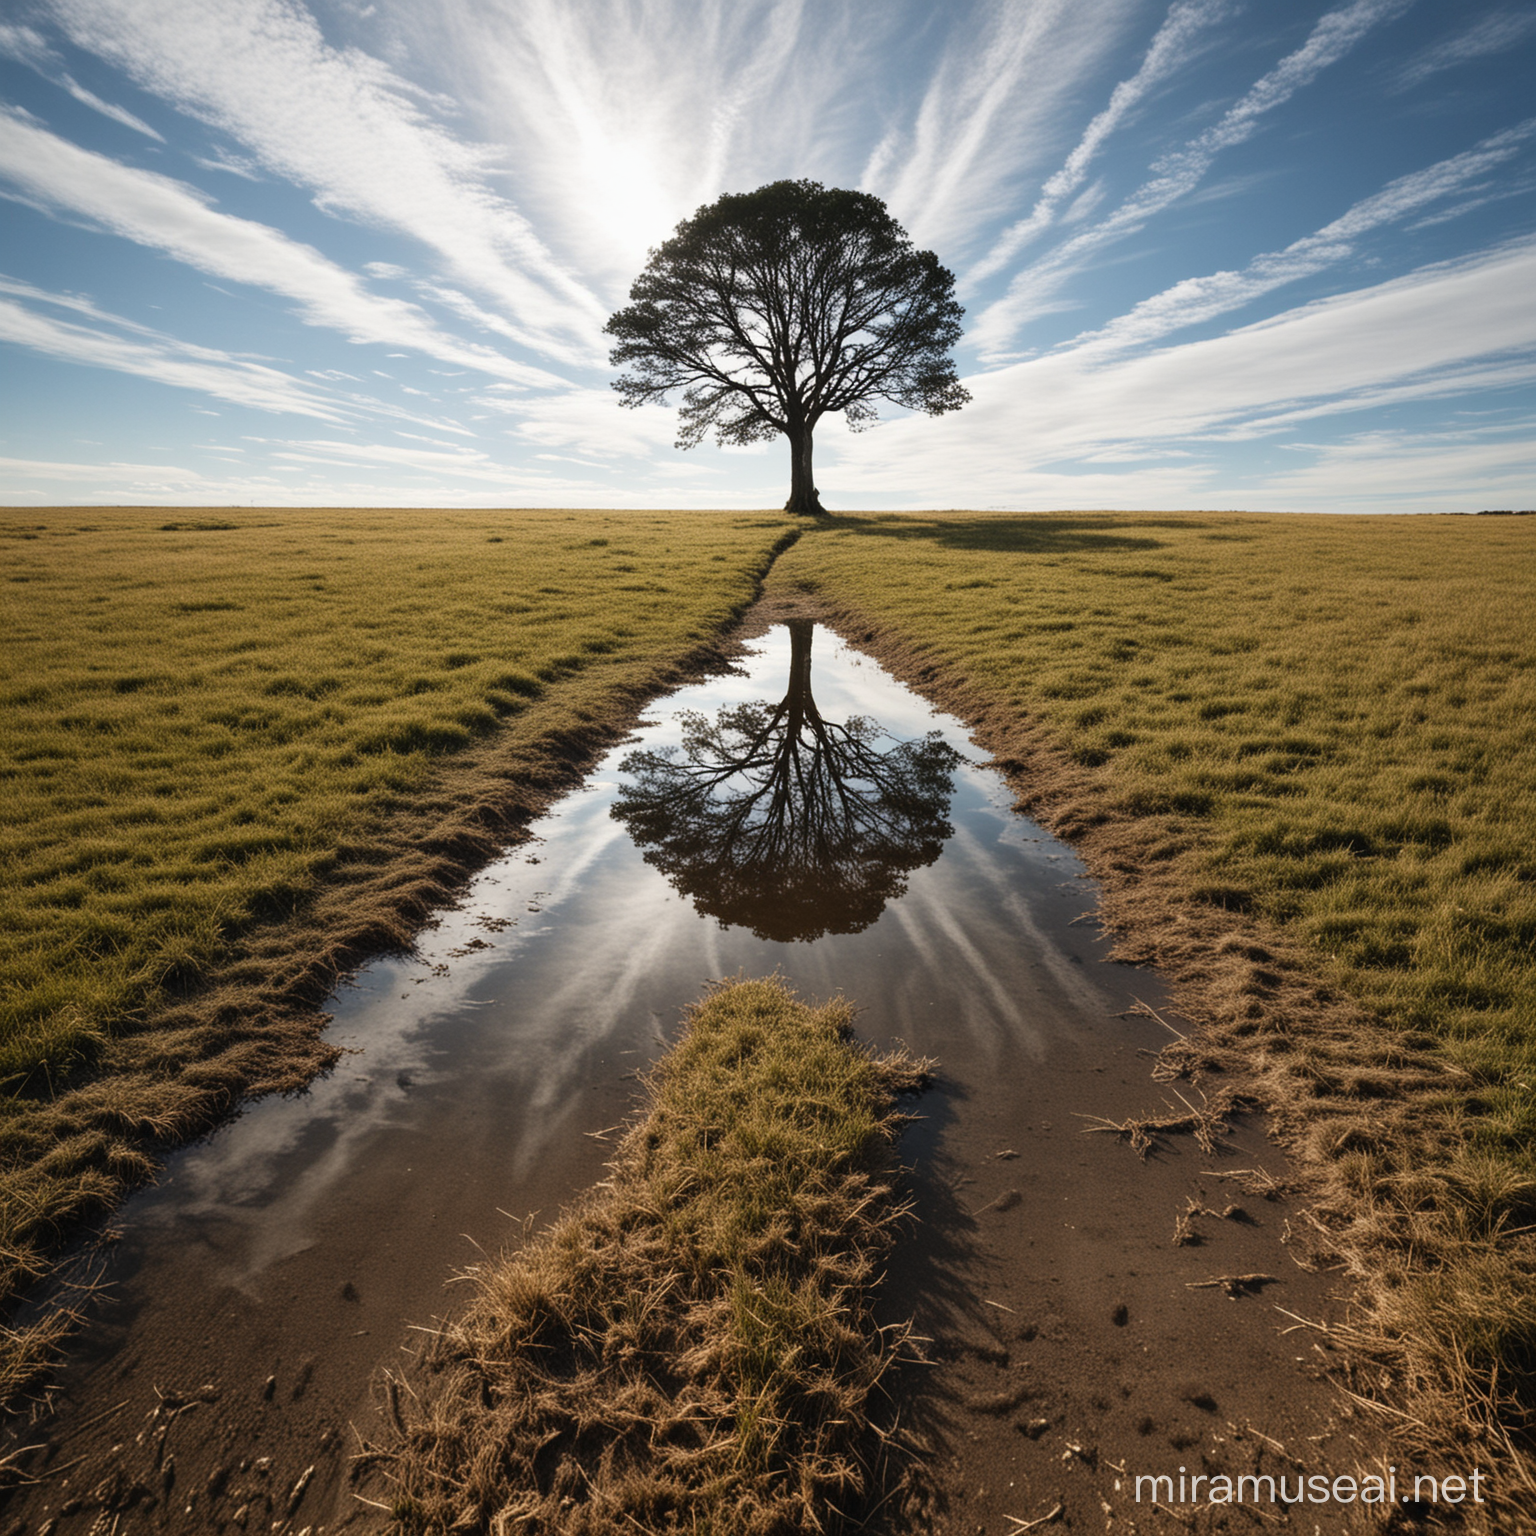 Solitary Tree in Mirrored Landscape Surreal UpsideDown World